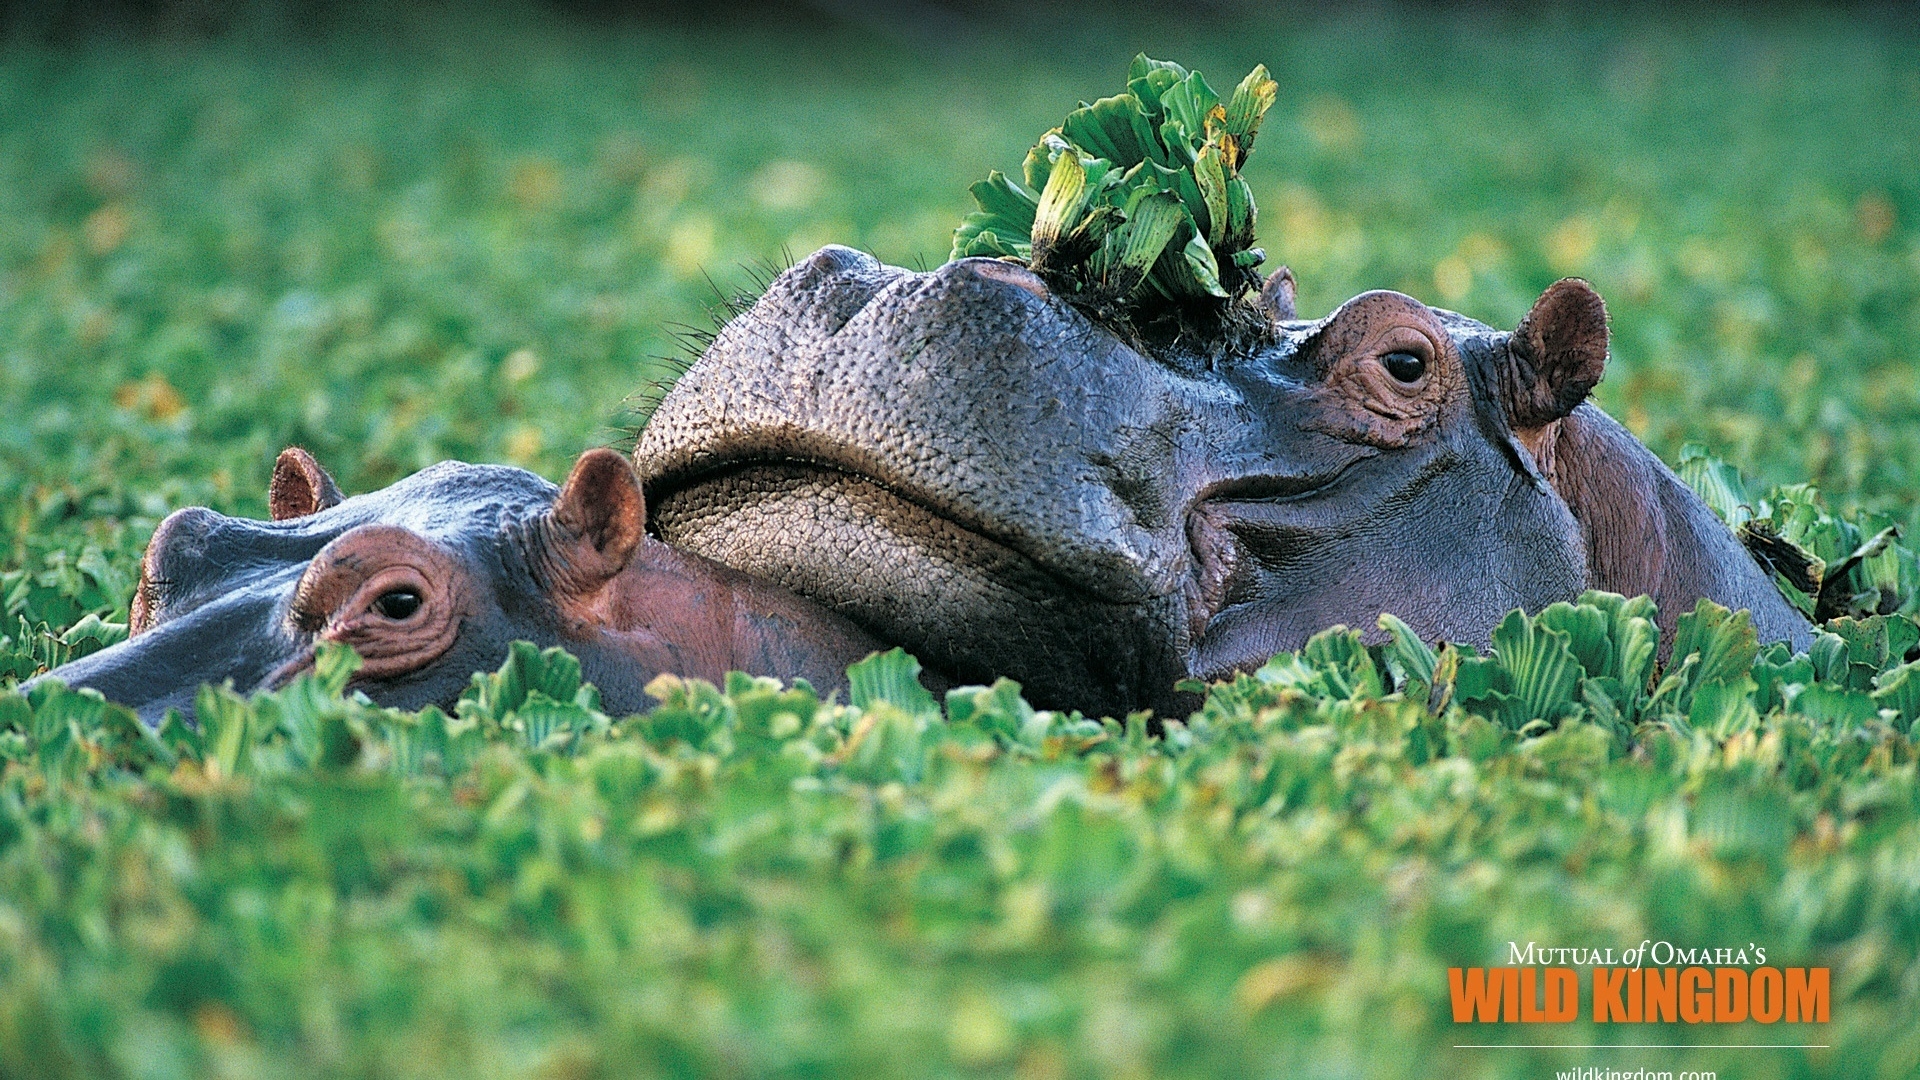 Hippos for 1920 x 1080 HDTV 1080p resolution